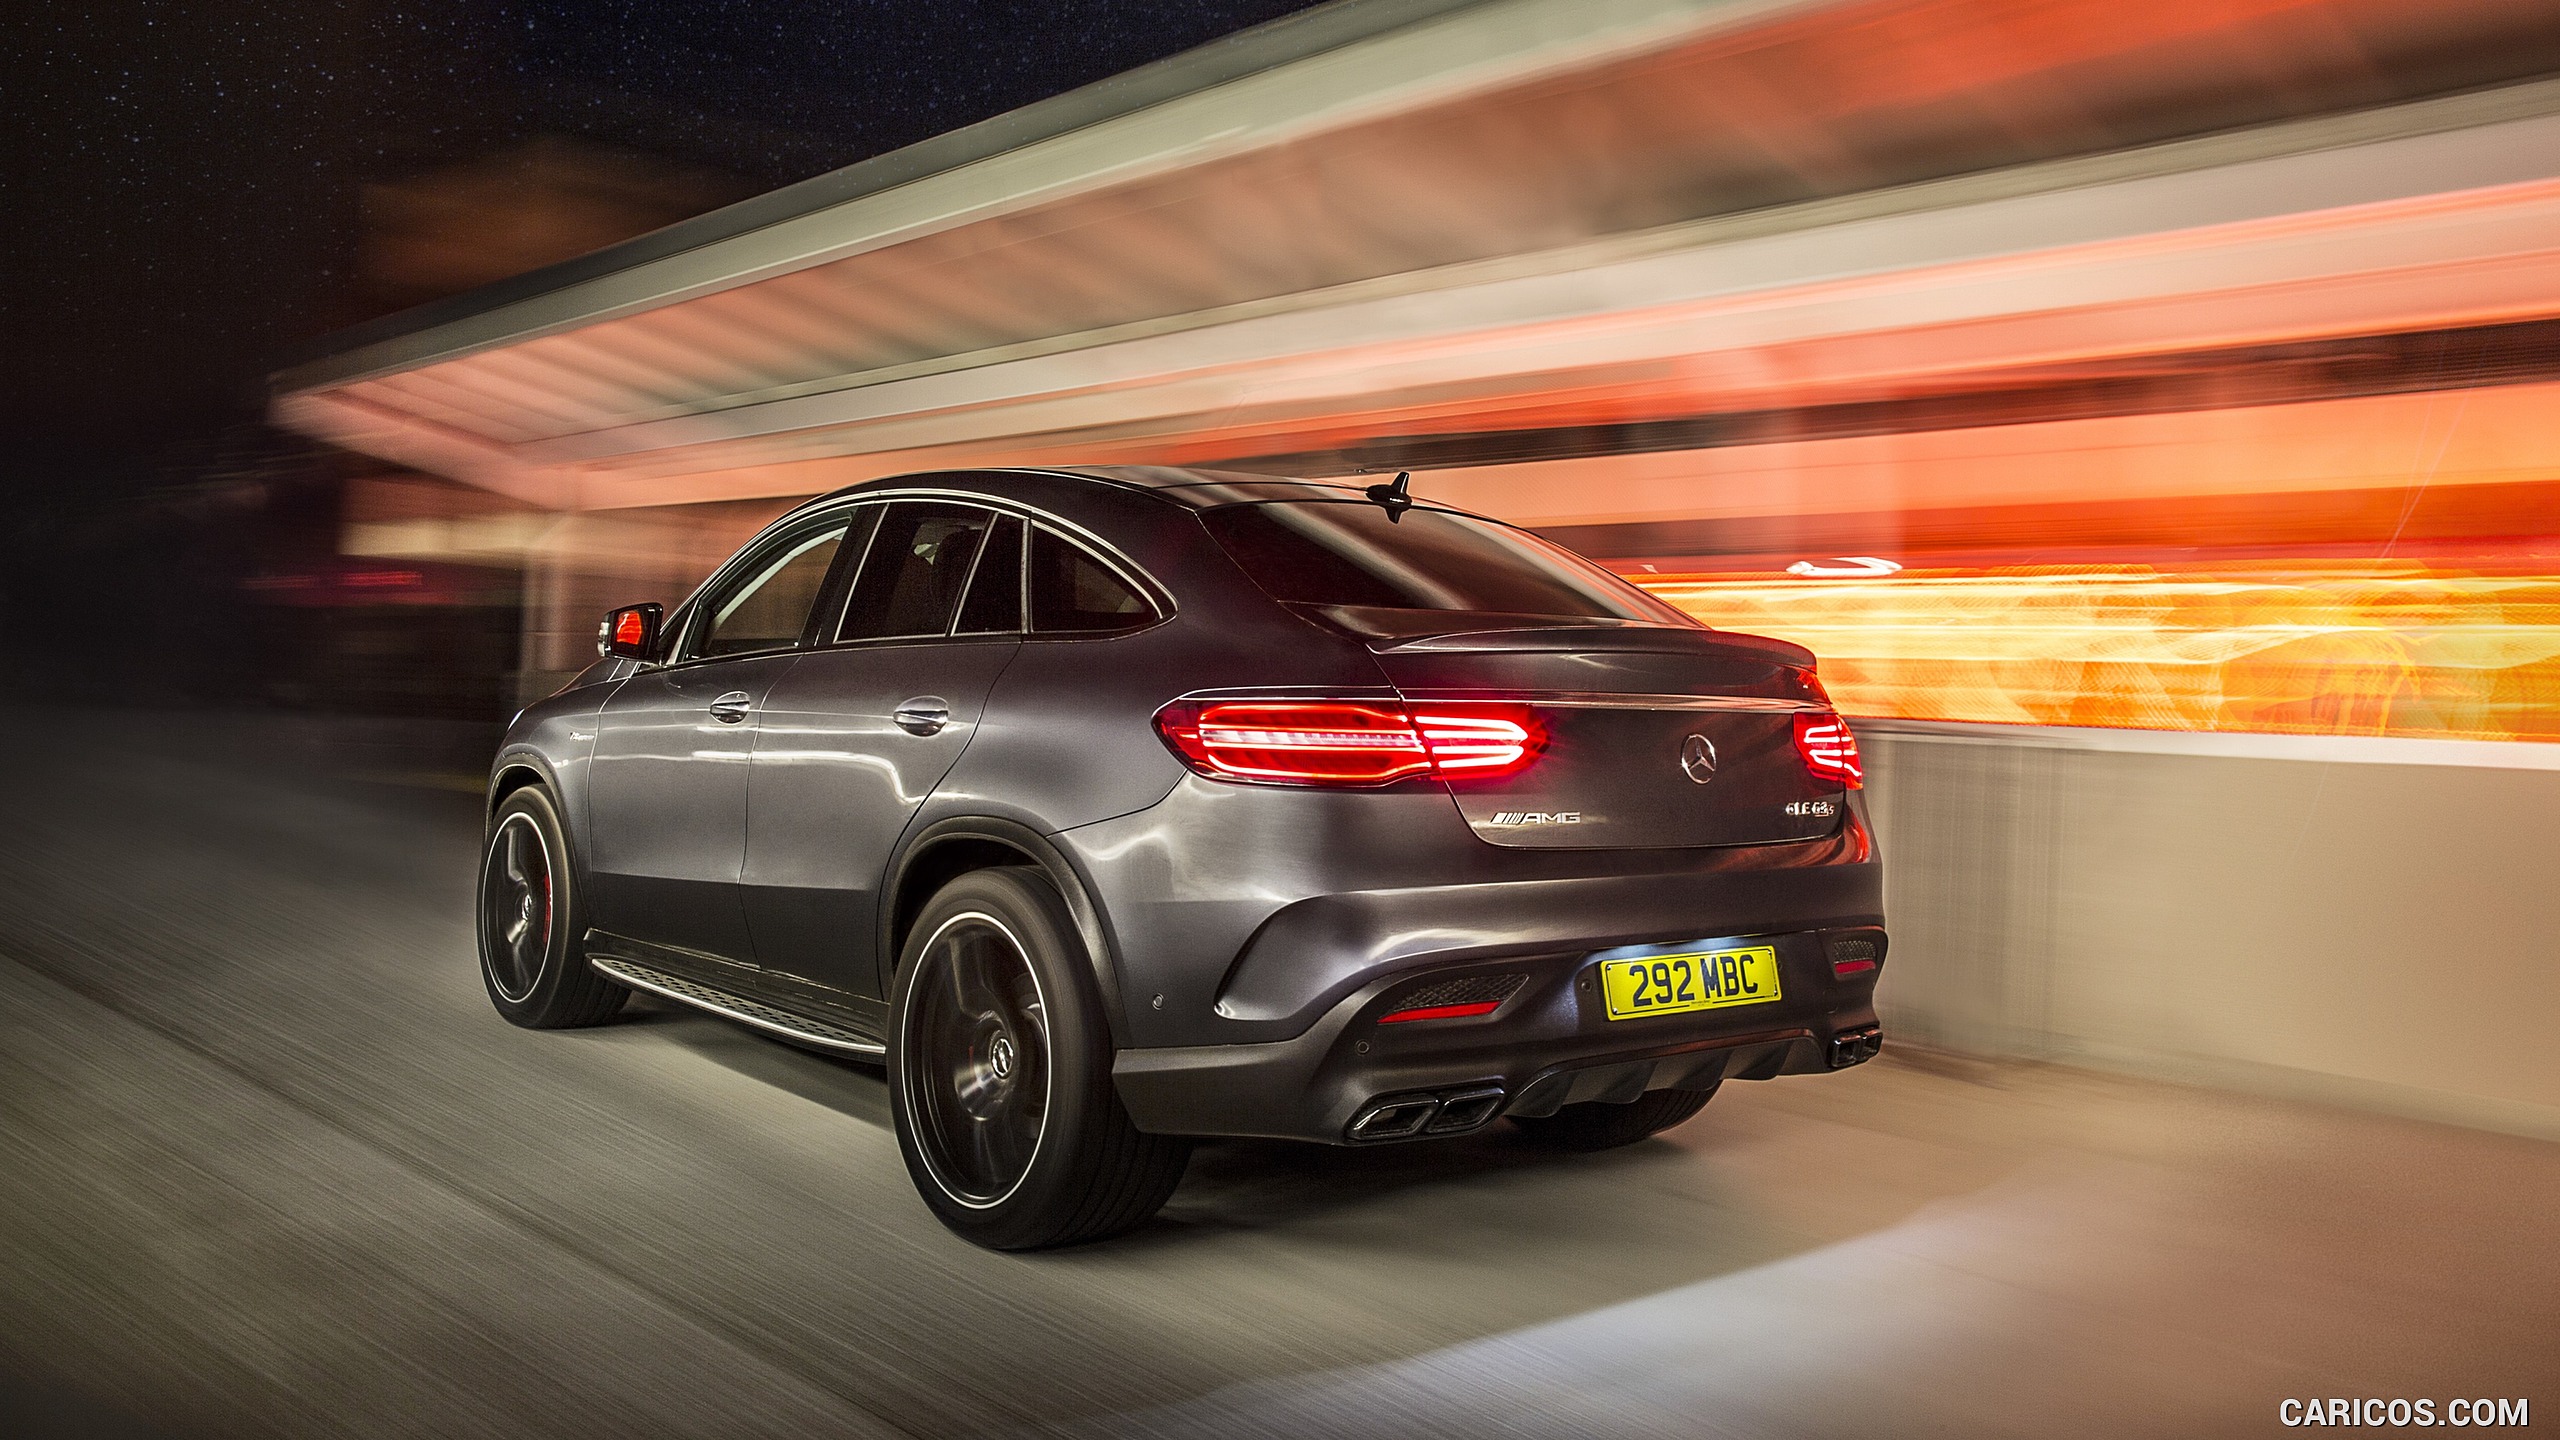 2016 Mercedes-AMG GLE 63 S Coupe (UK-Spec) - Rear, #54 of 65